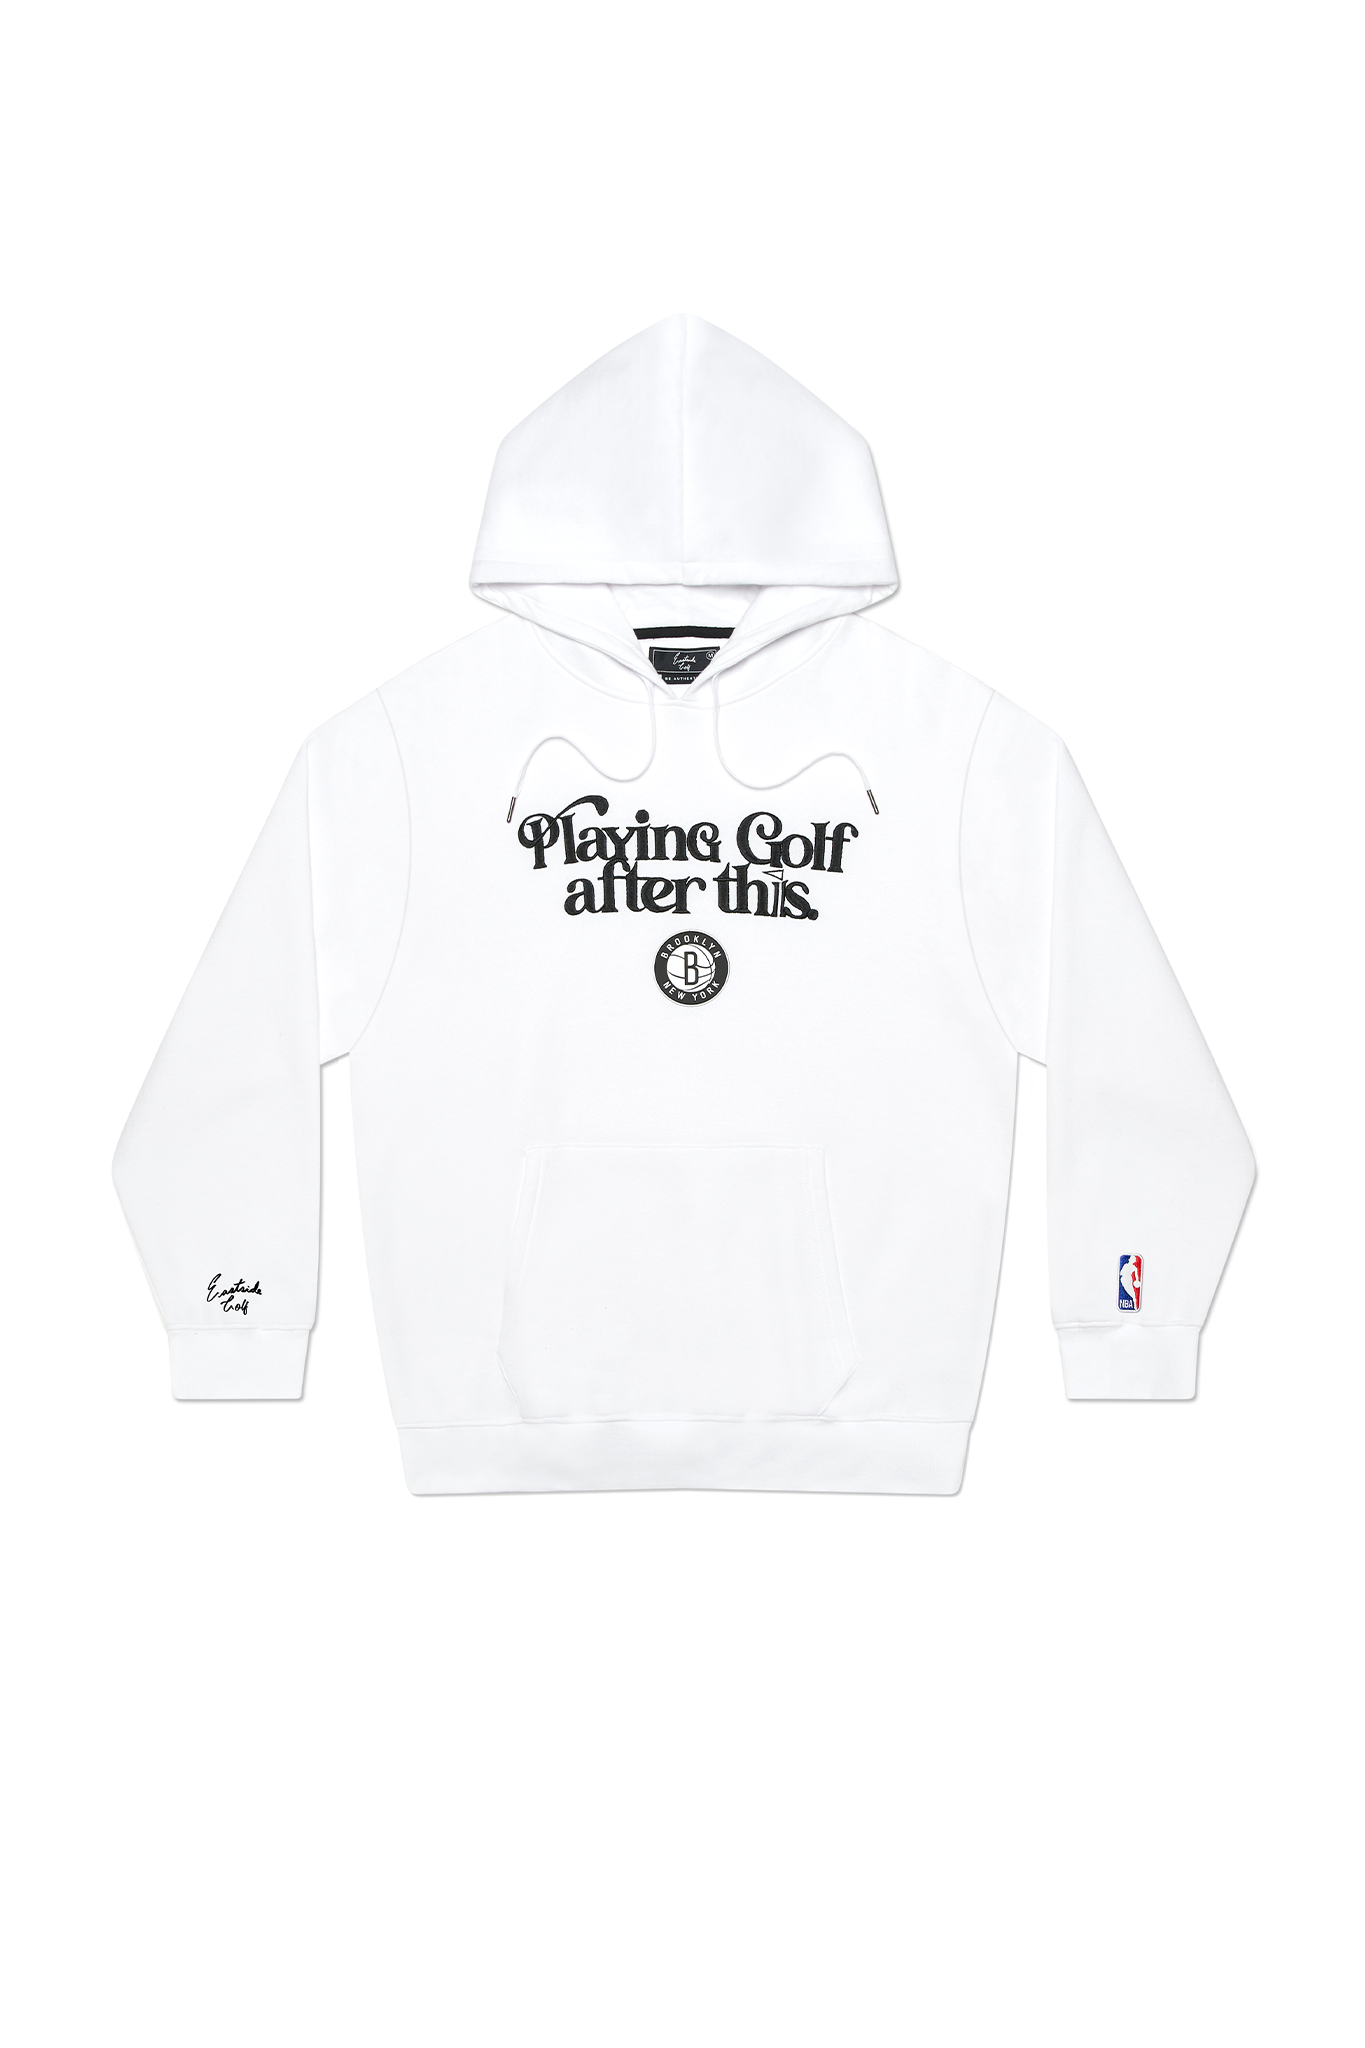 Eastside NBA-Playing Golf After This Brooklyn Nets Hoodie White